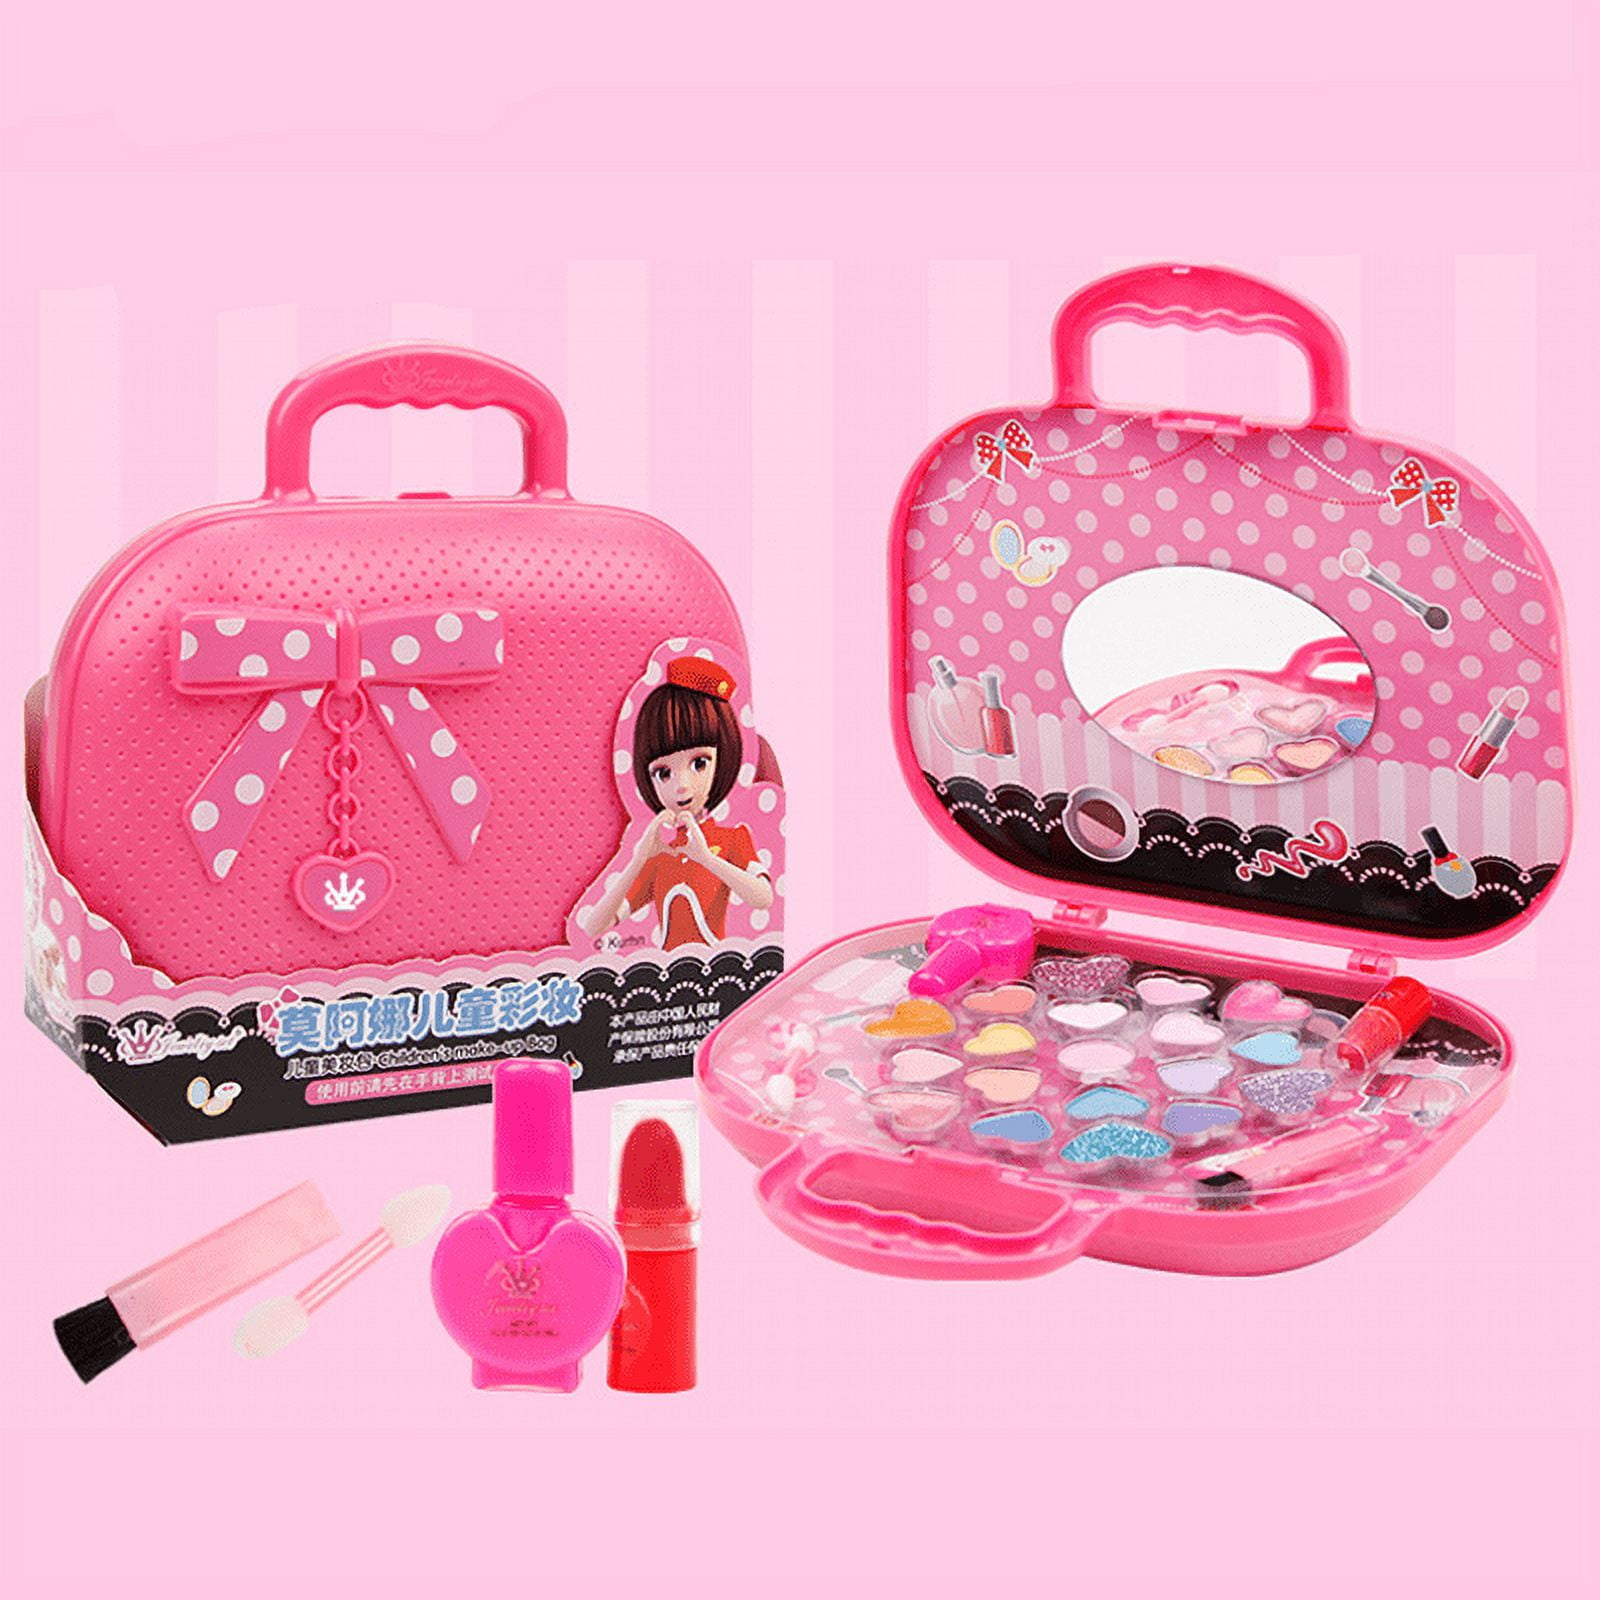 Roofei Kids Makeup Kit for Girls Real Kids Cosmetics Make Up Set with ...